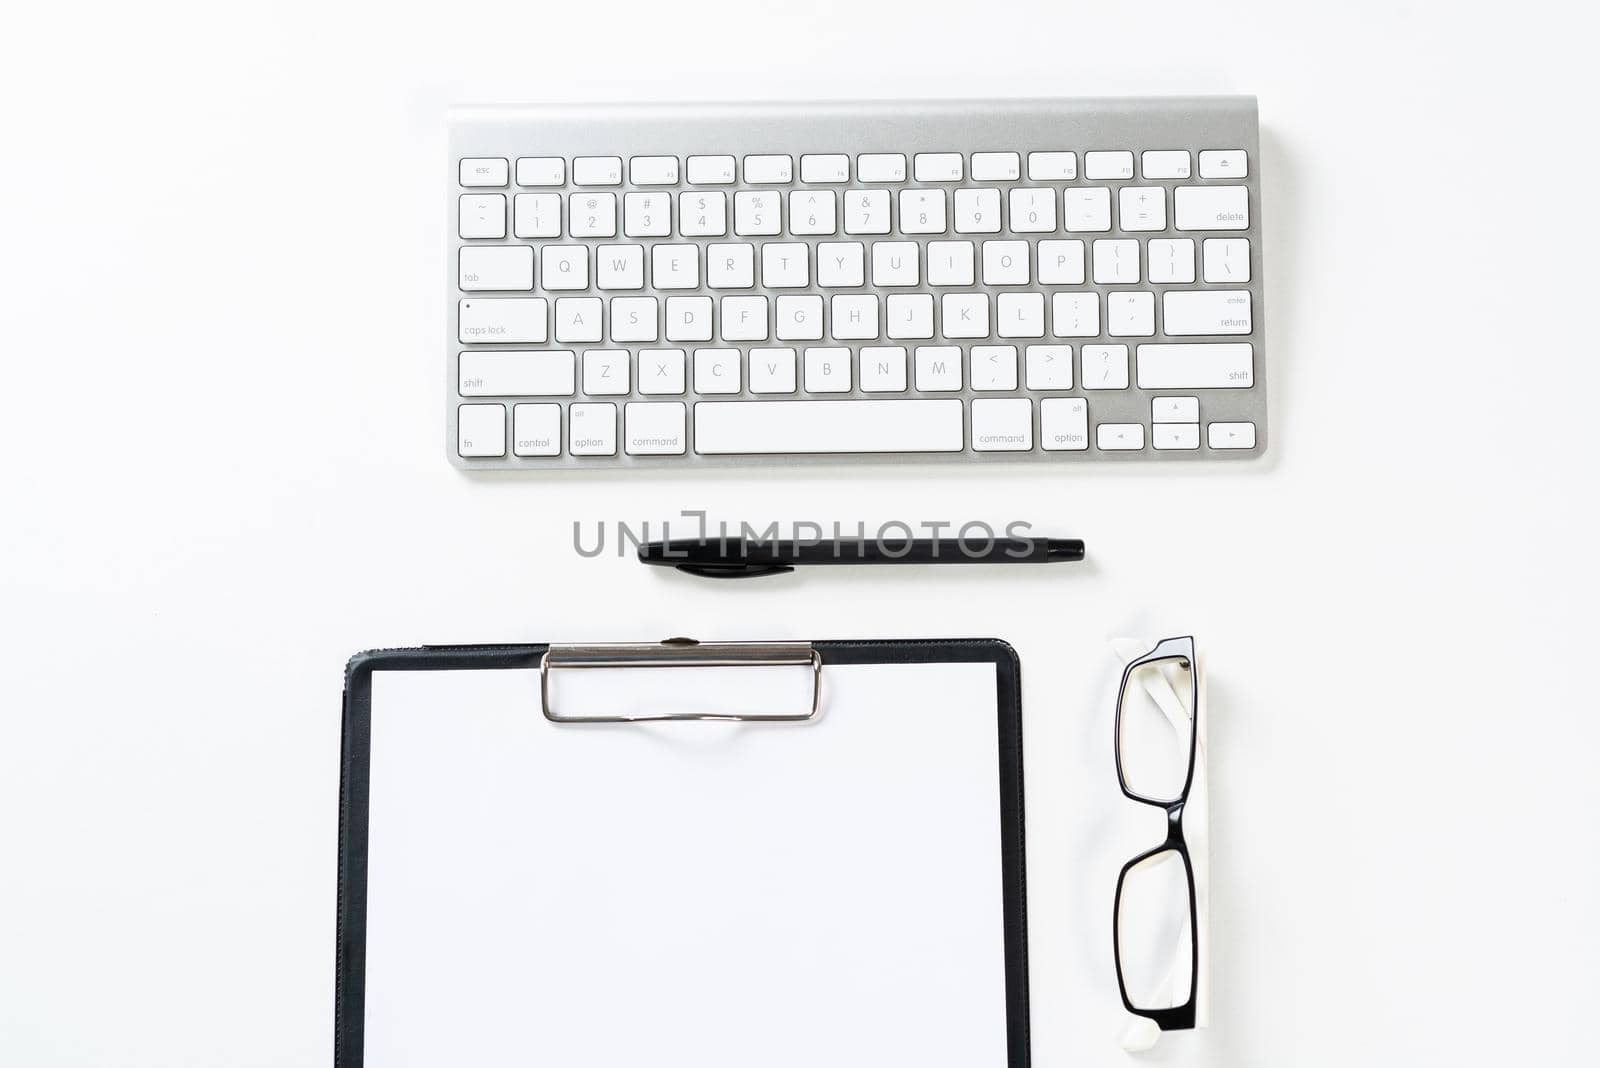 Top view of well organized workplace with office accessories. Clipboard with blank paper page, glasses and wireless keyboard on white surface. Education, creativity and working concept with copy space